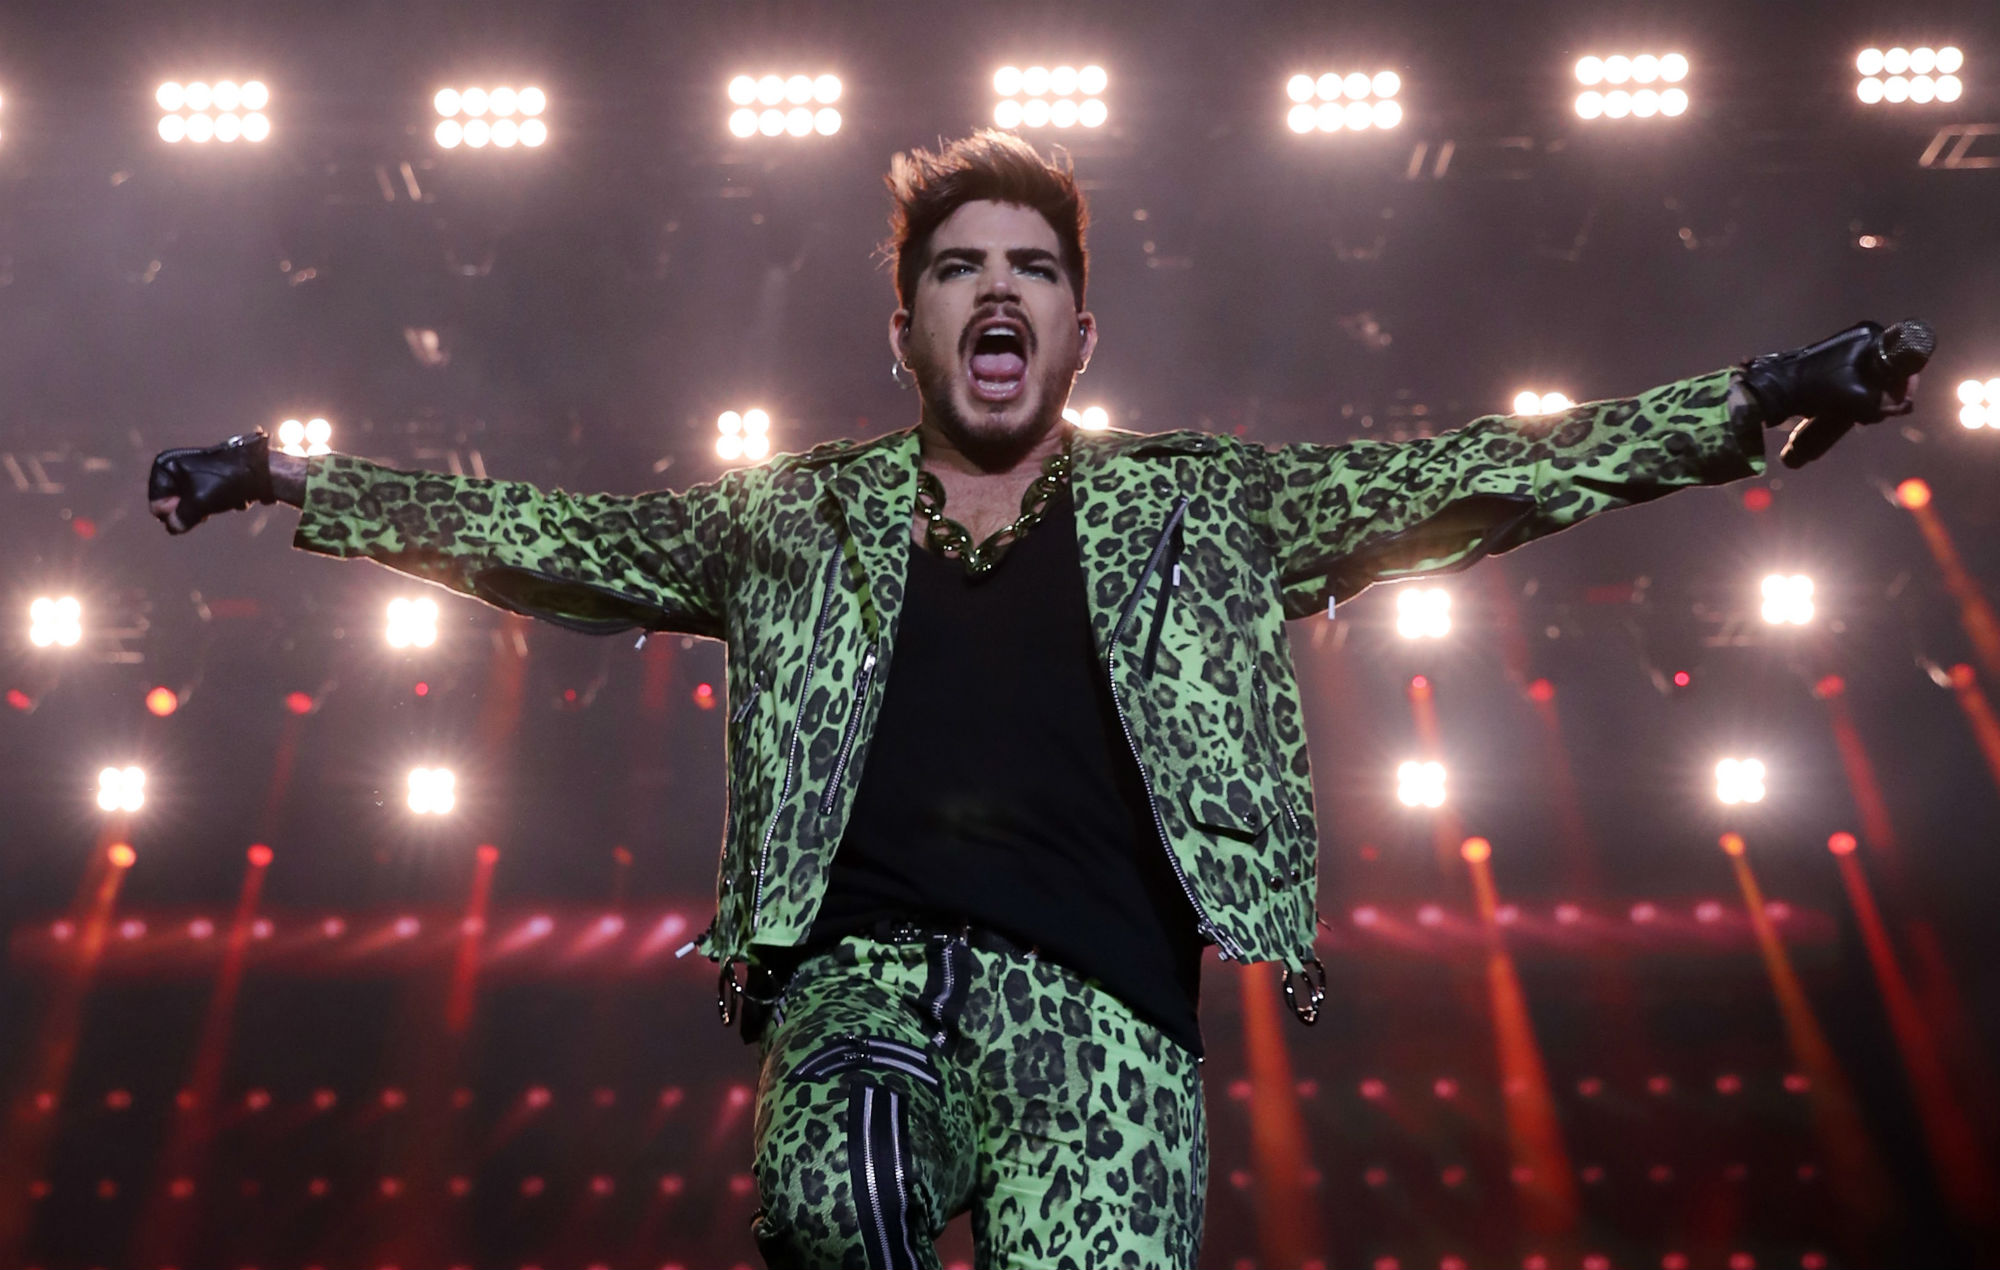 Adam Lambert opens up about his performance with Quinn